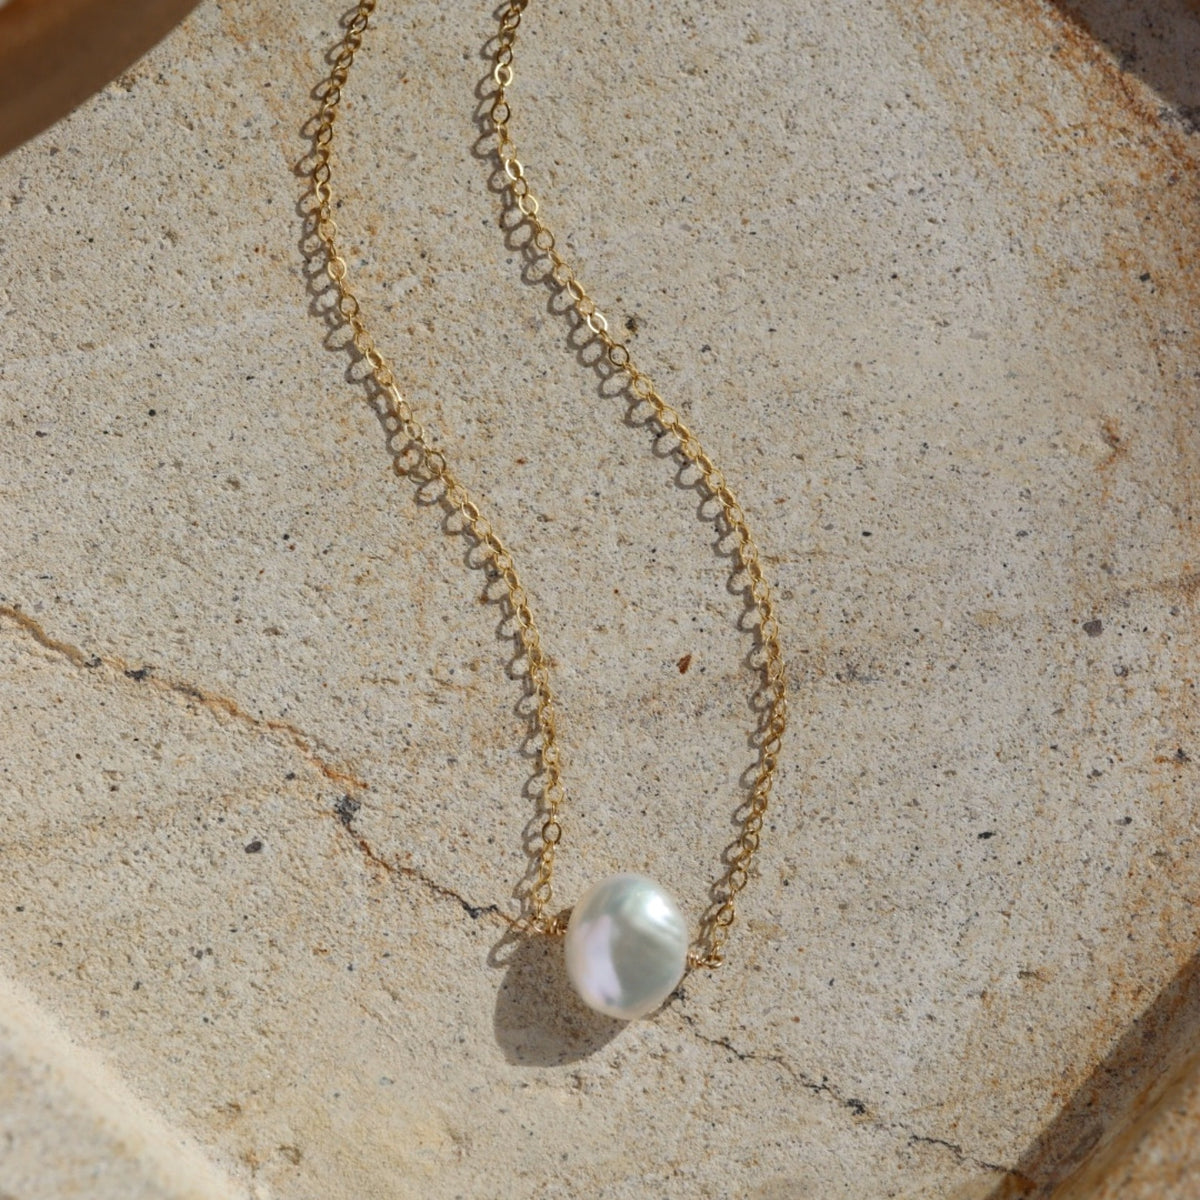 Md freshwater pearl necklace